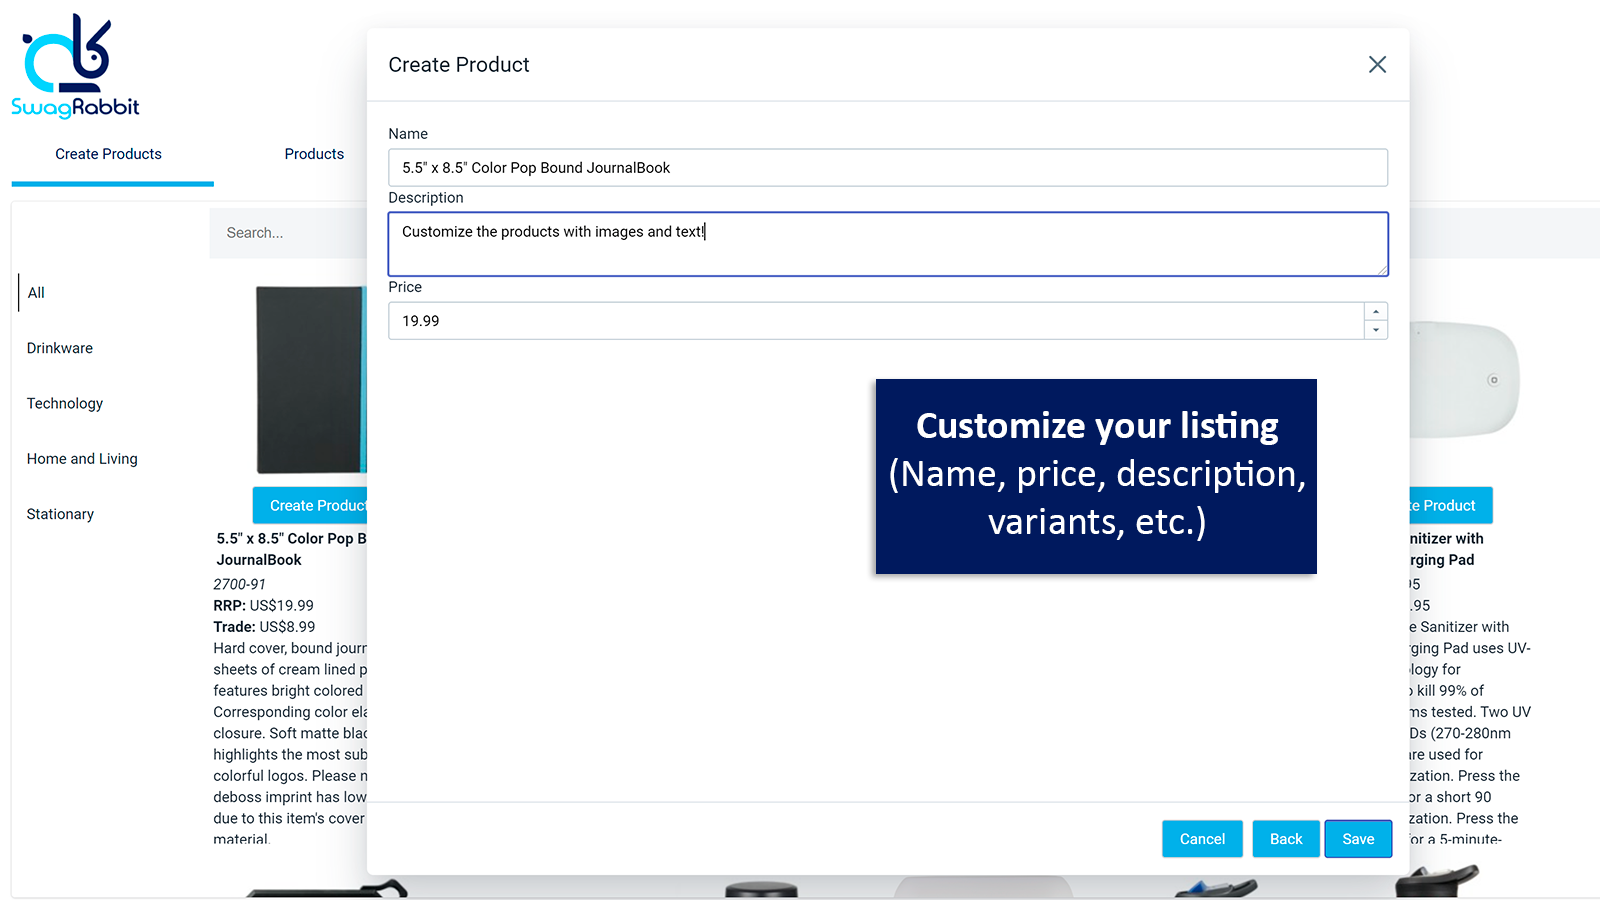 Customize your listing (name, price, description, variants)